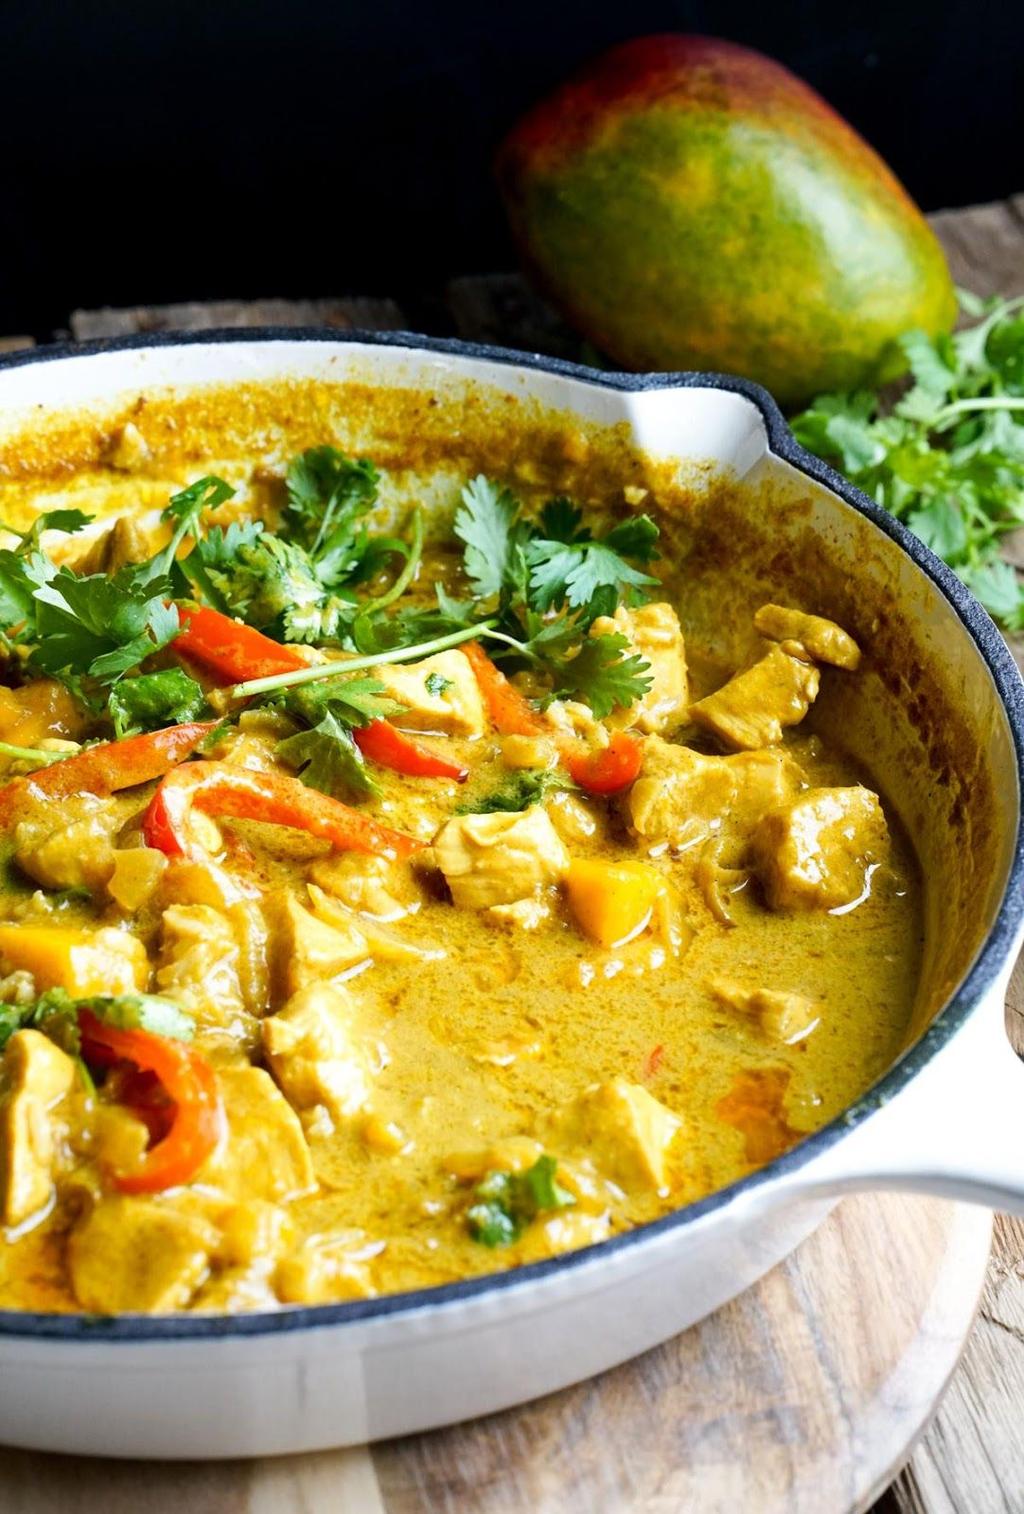 MANGO CHICKEN CURRY Yield: 4 servings 1 TBS Butter 1 onion, chopped 1/2 red pepper, sliced 2 tsp ginger 2 garlic cloves, crushed 1 1/2 TBS curry powder (or 2-3 TBS for a spicier curry) 1/2 tsp cumin